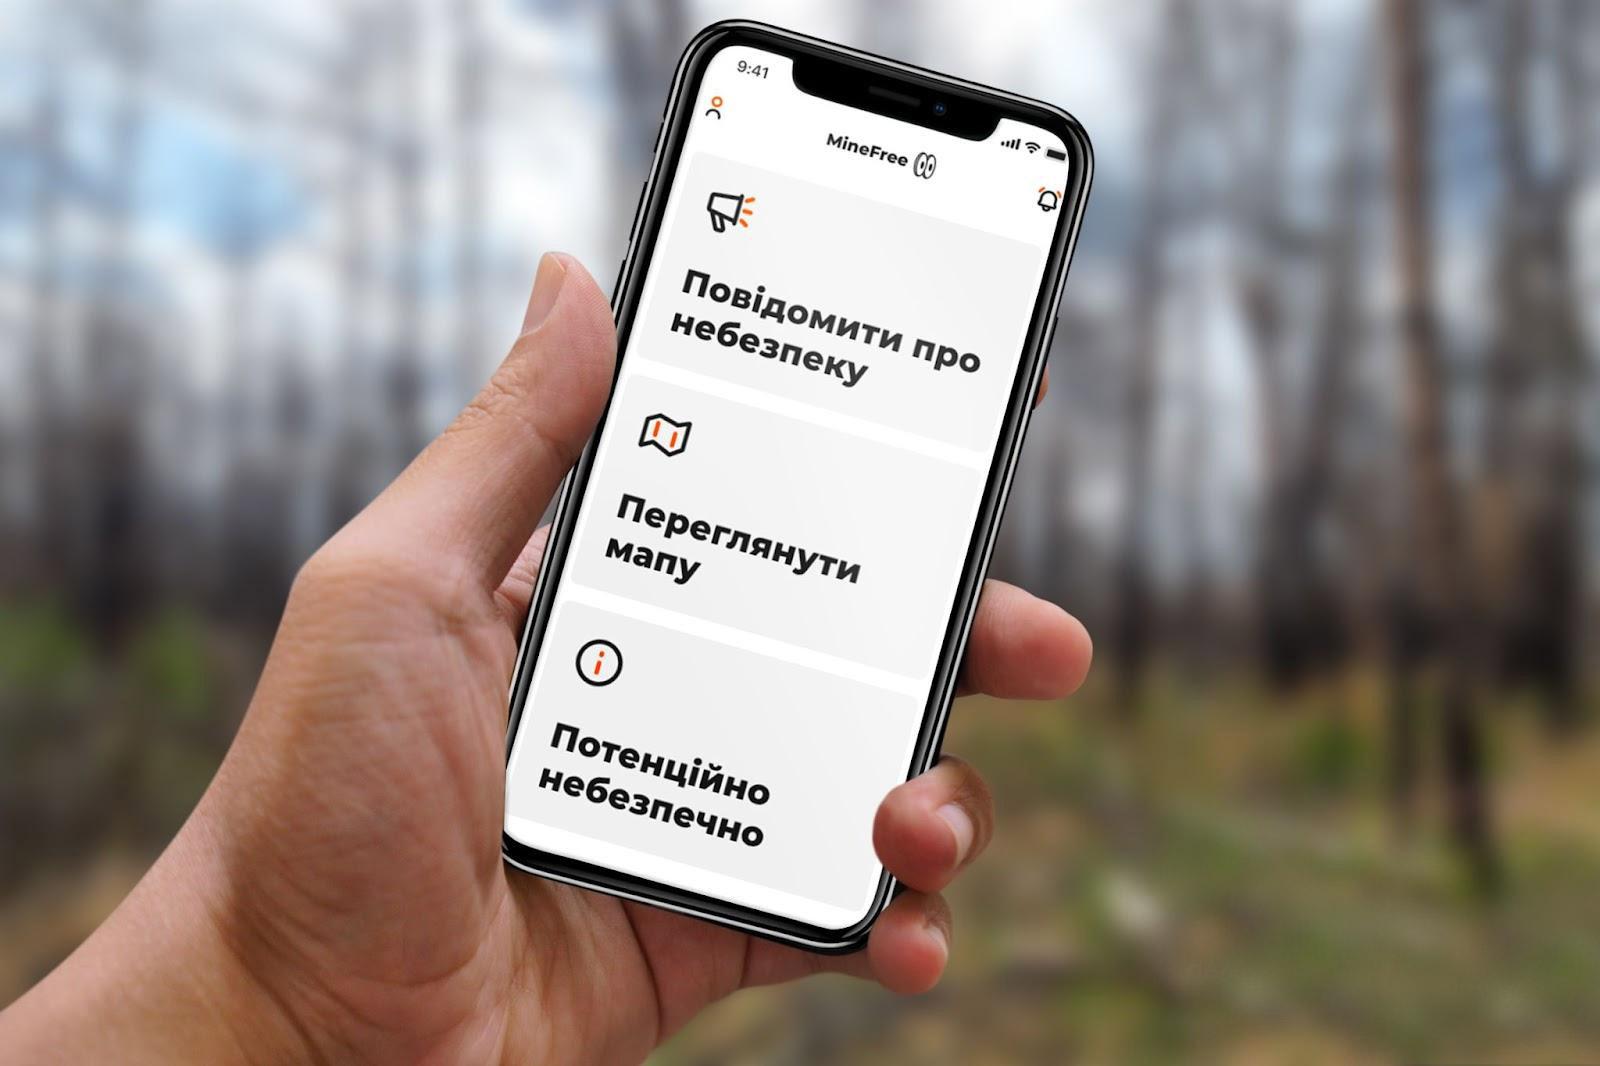 "MineFree" mine safety mobile application launched in Ukraine